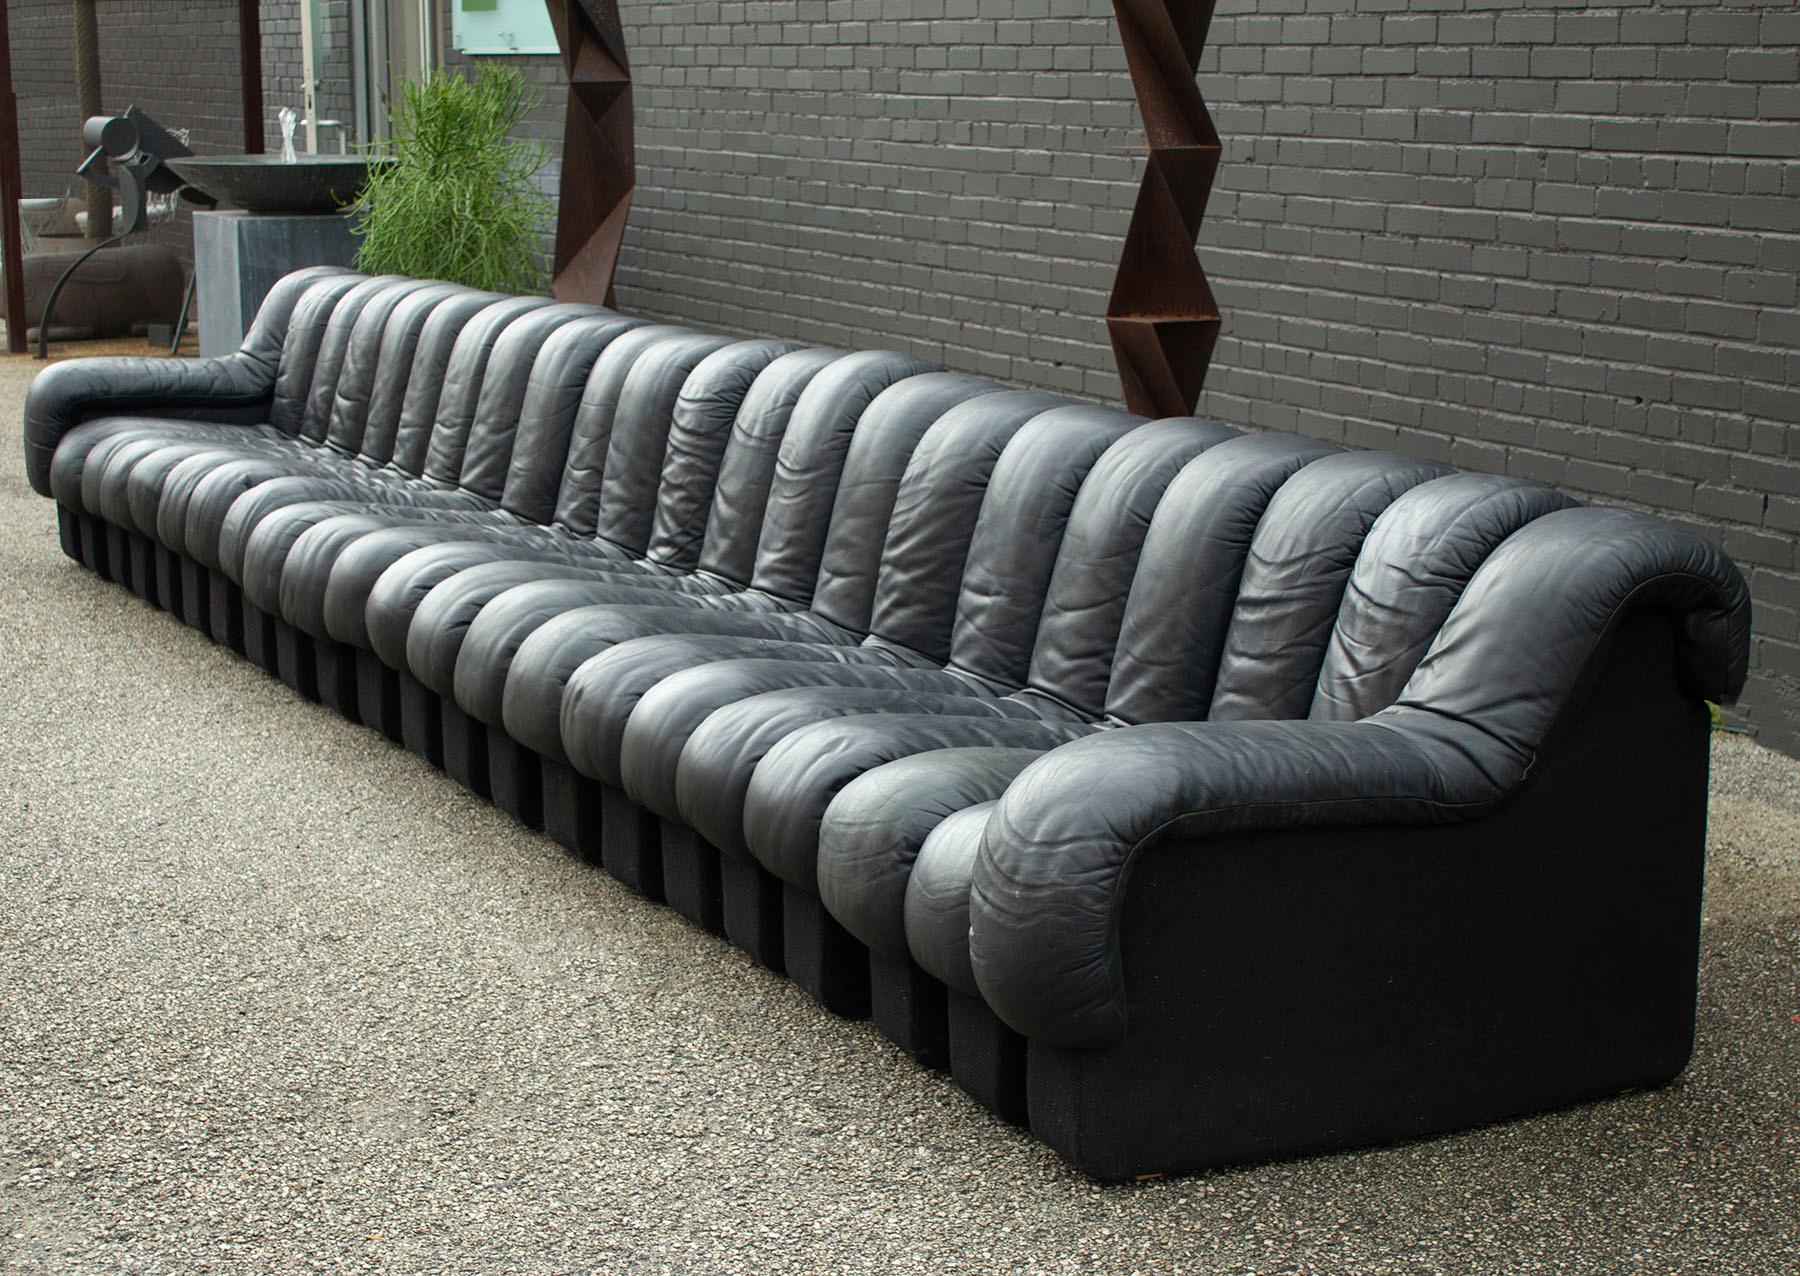 Late 20th Century De Sede DS-600 'Non-Stop' Tatzelwurm Sectional Sofa in Black Leather 22 Sections